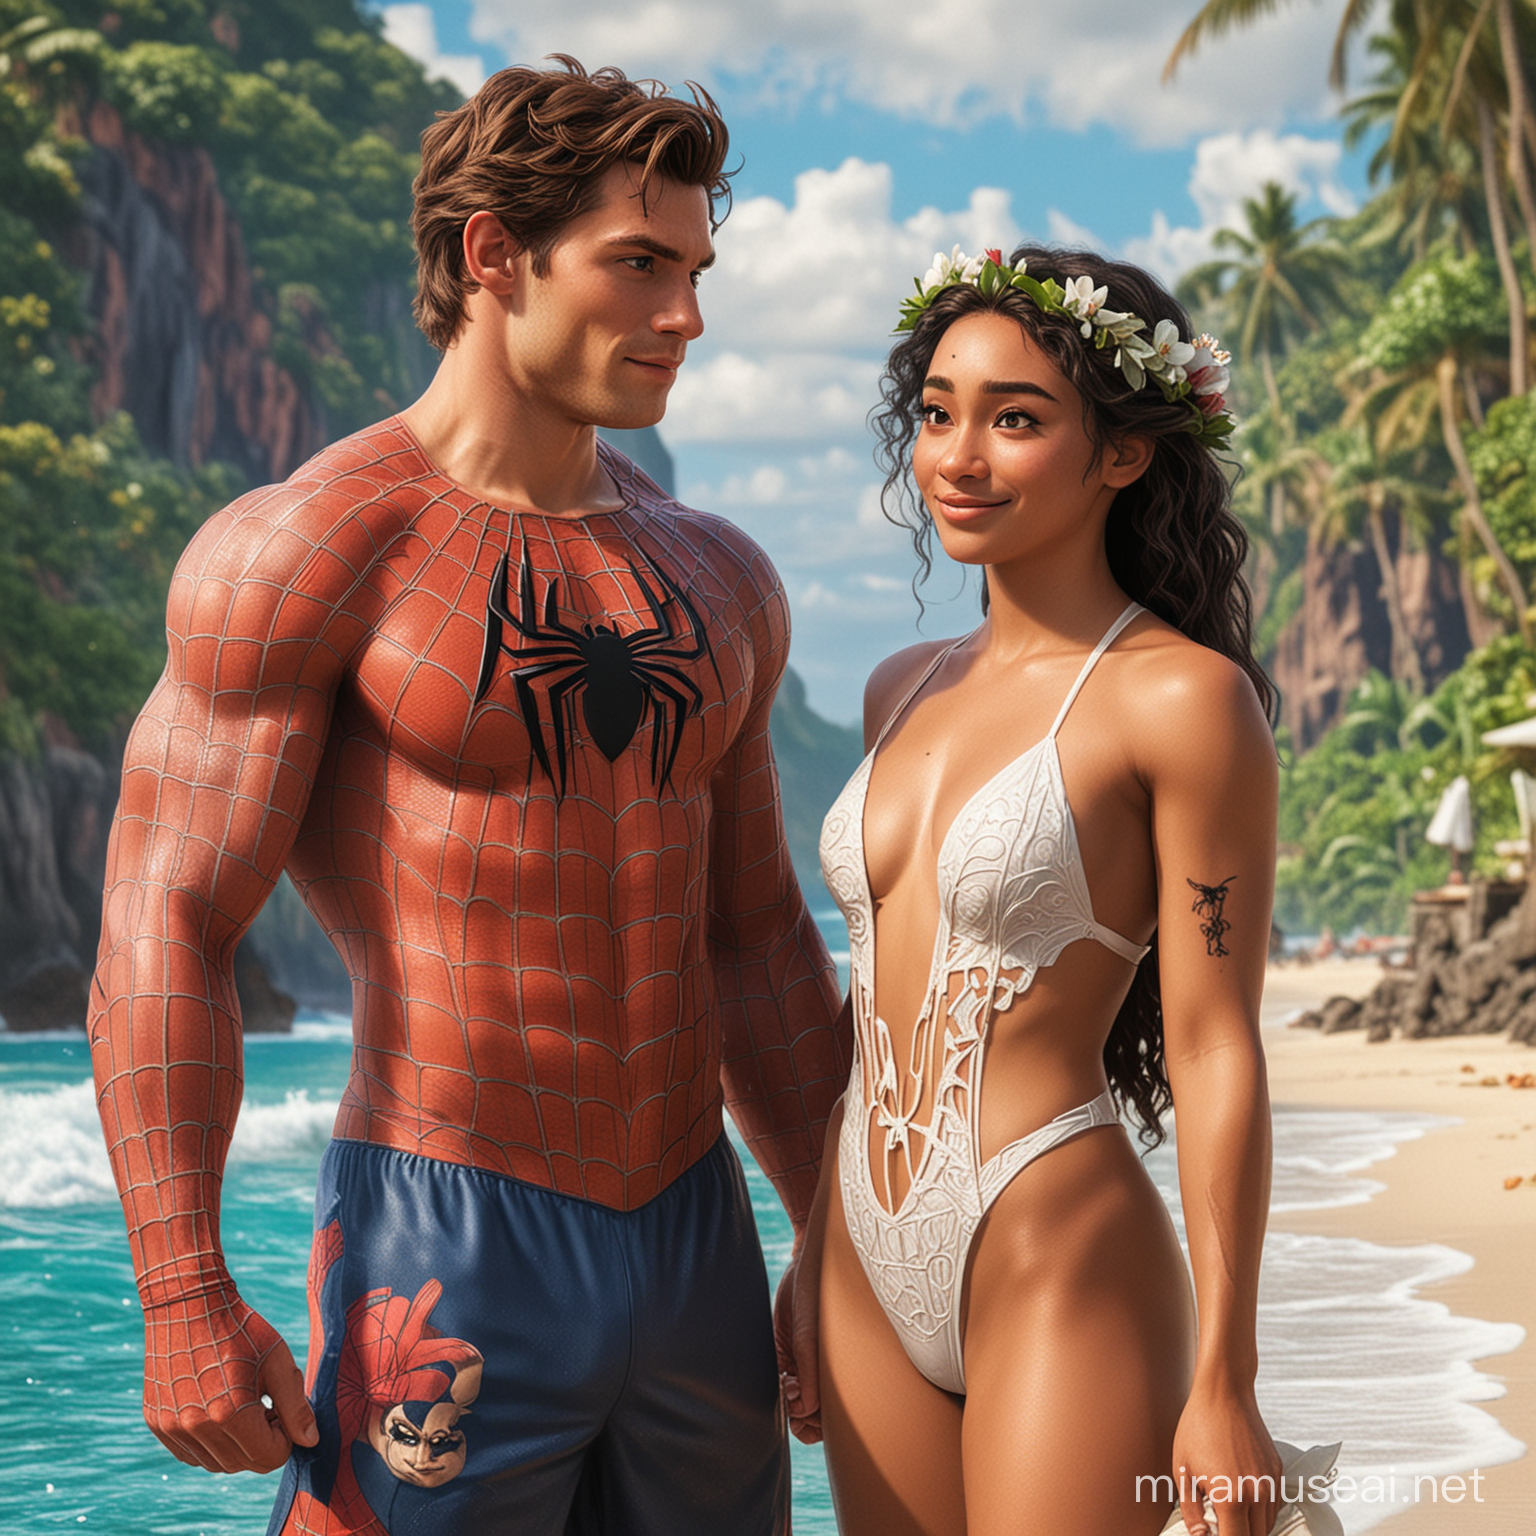 Spiderman with his bride (Moana) in a swimsuit